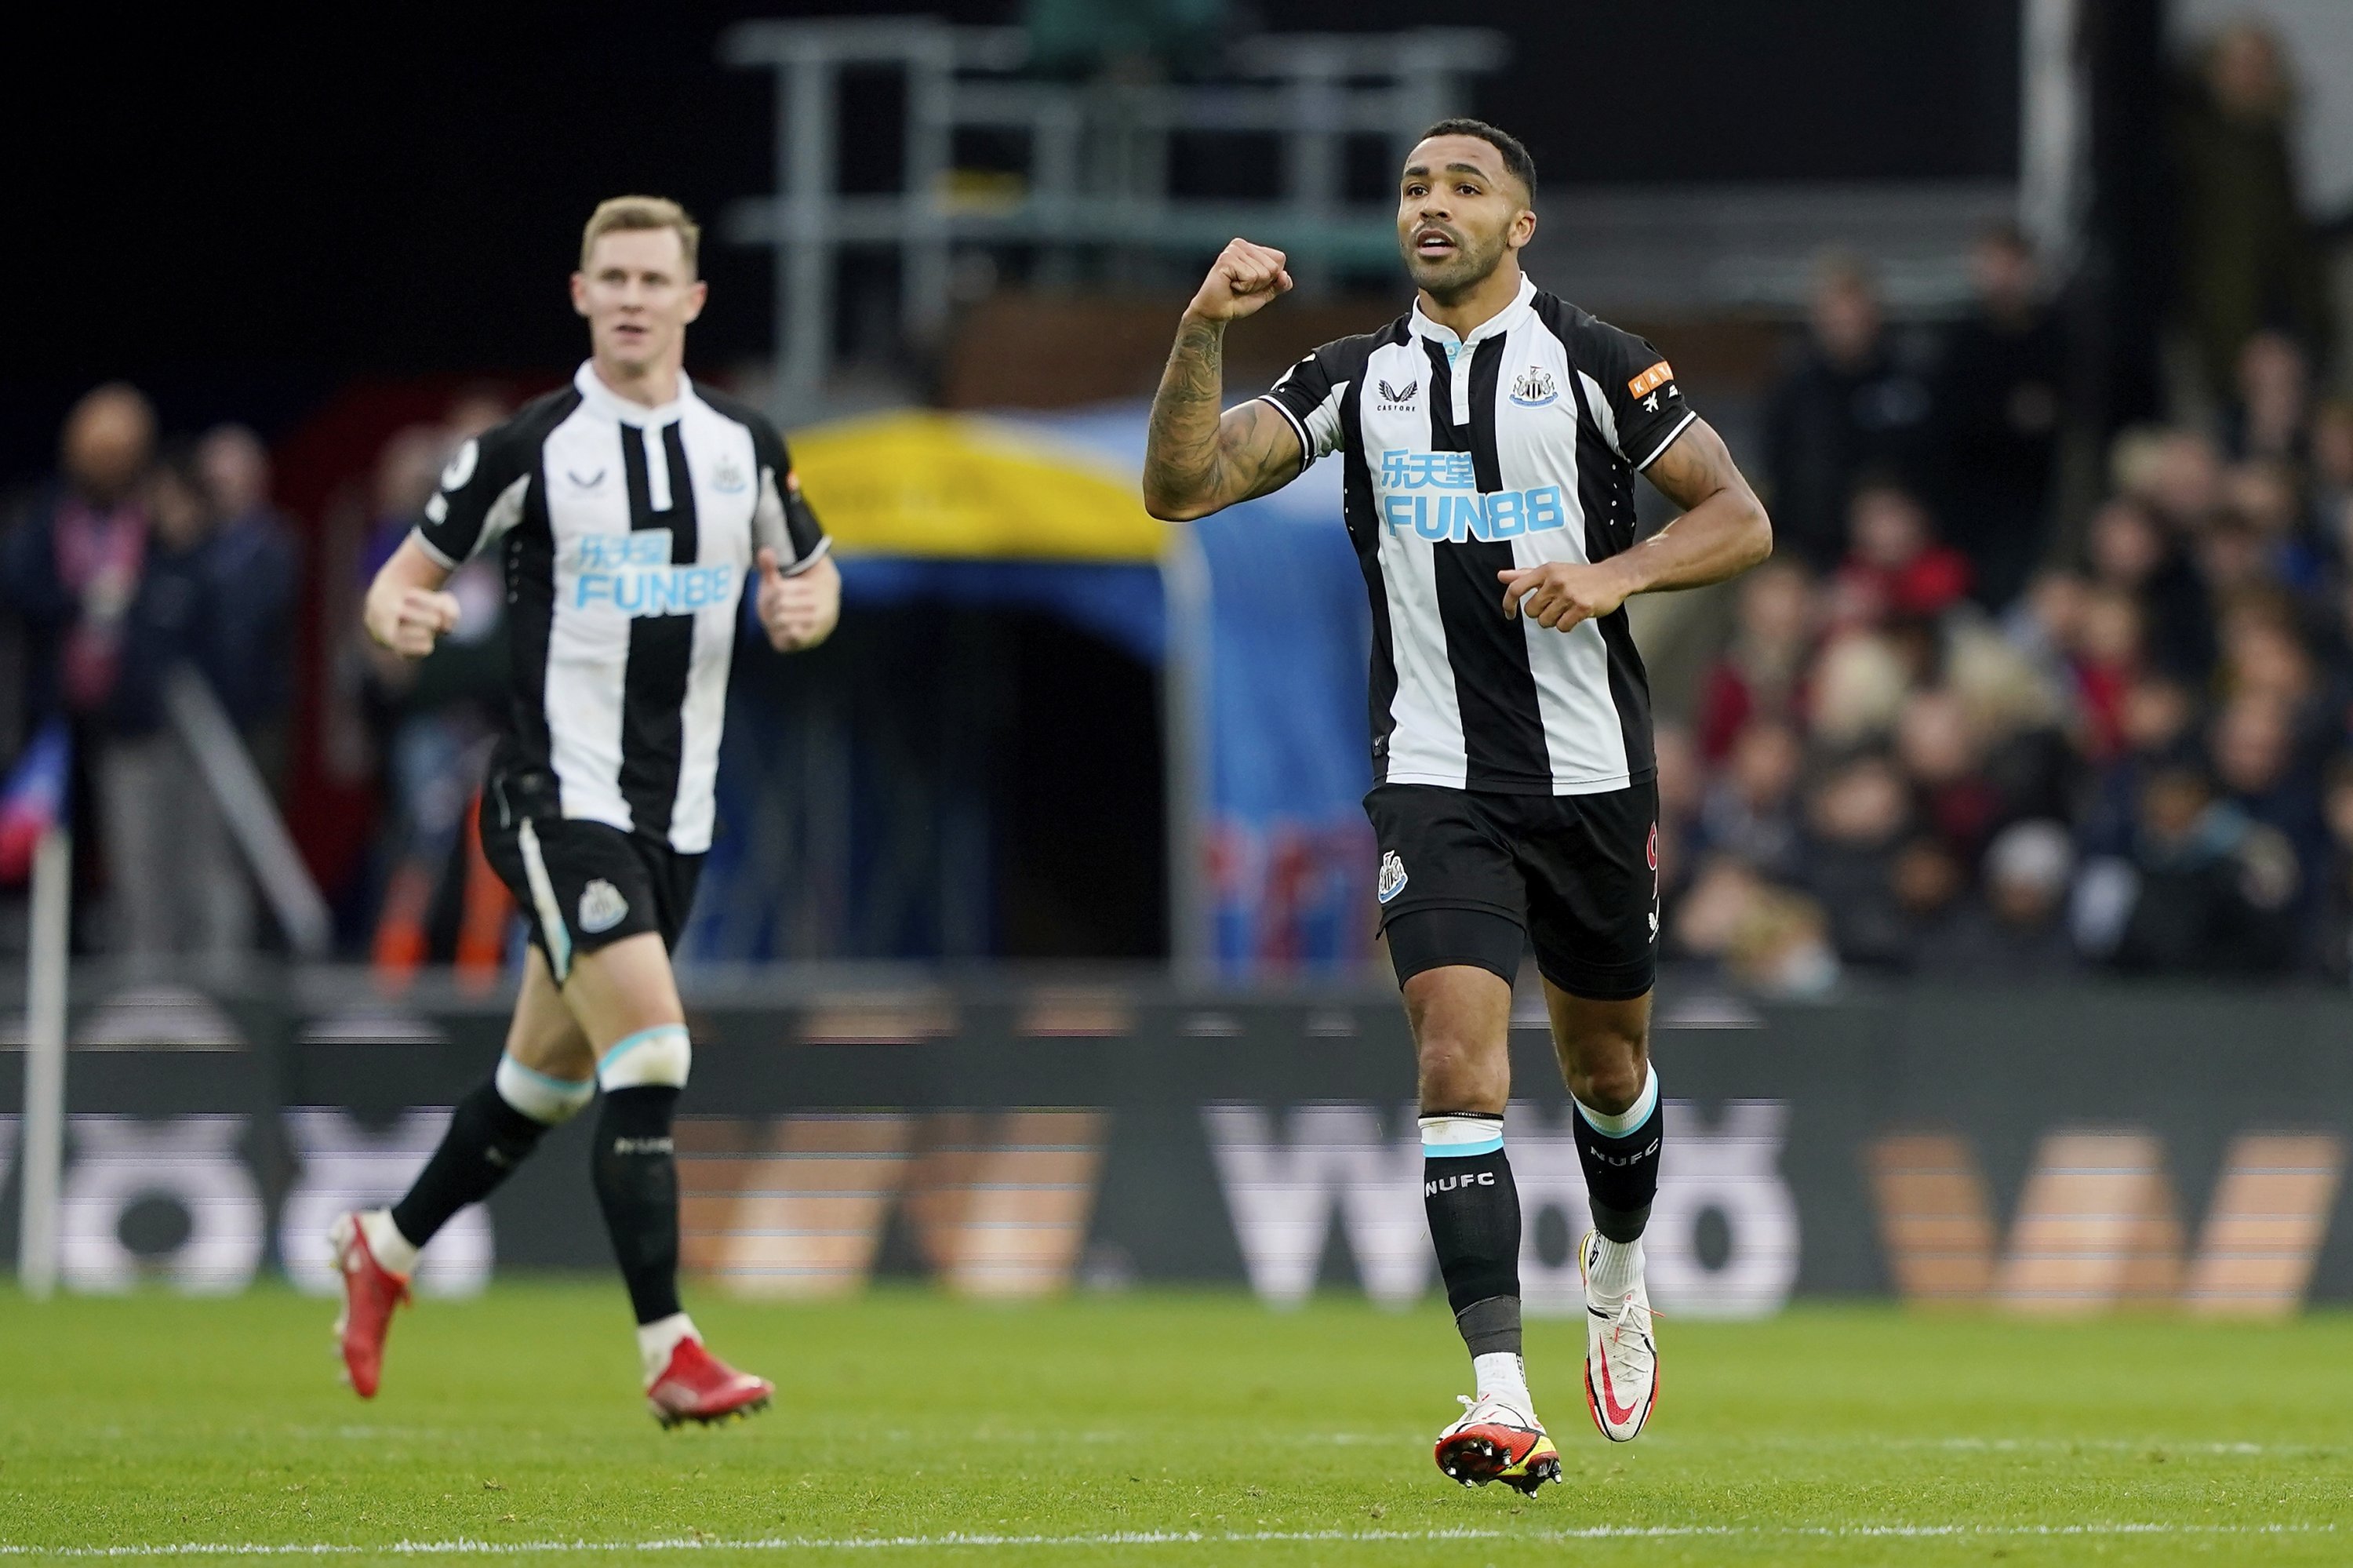 Newcastle's Callum Wilson (R) celebrates scoring against Crystal Palace during a Premier League match at Selhurst Park in London, England, Oct. 23, 2021. (AP Photo)